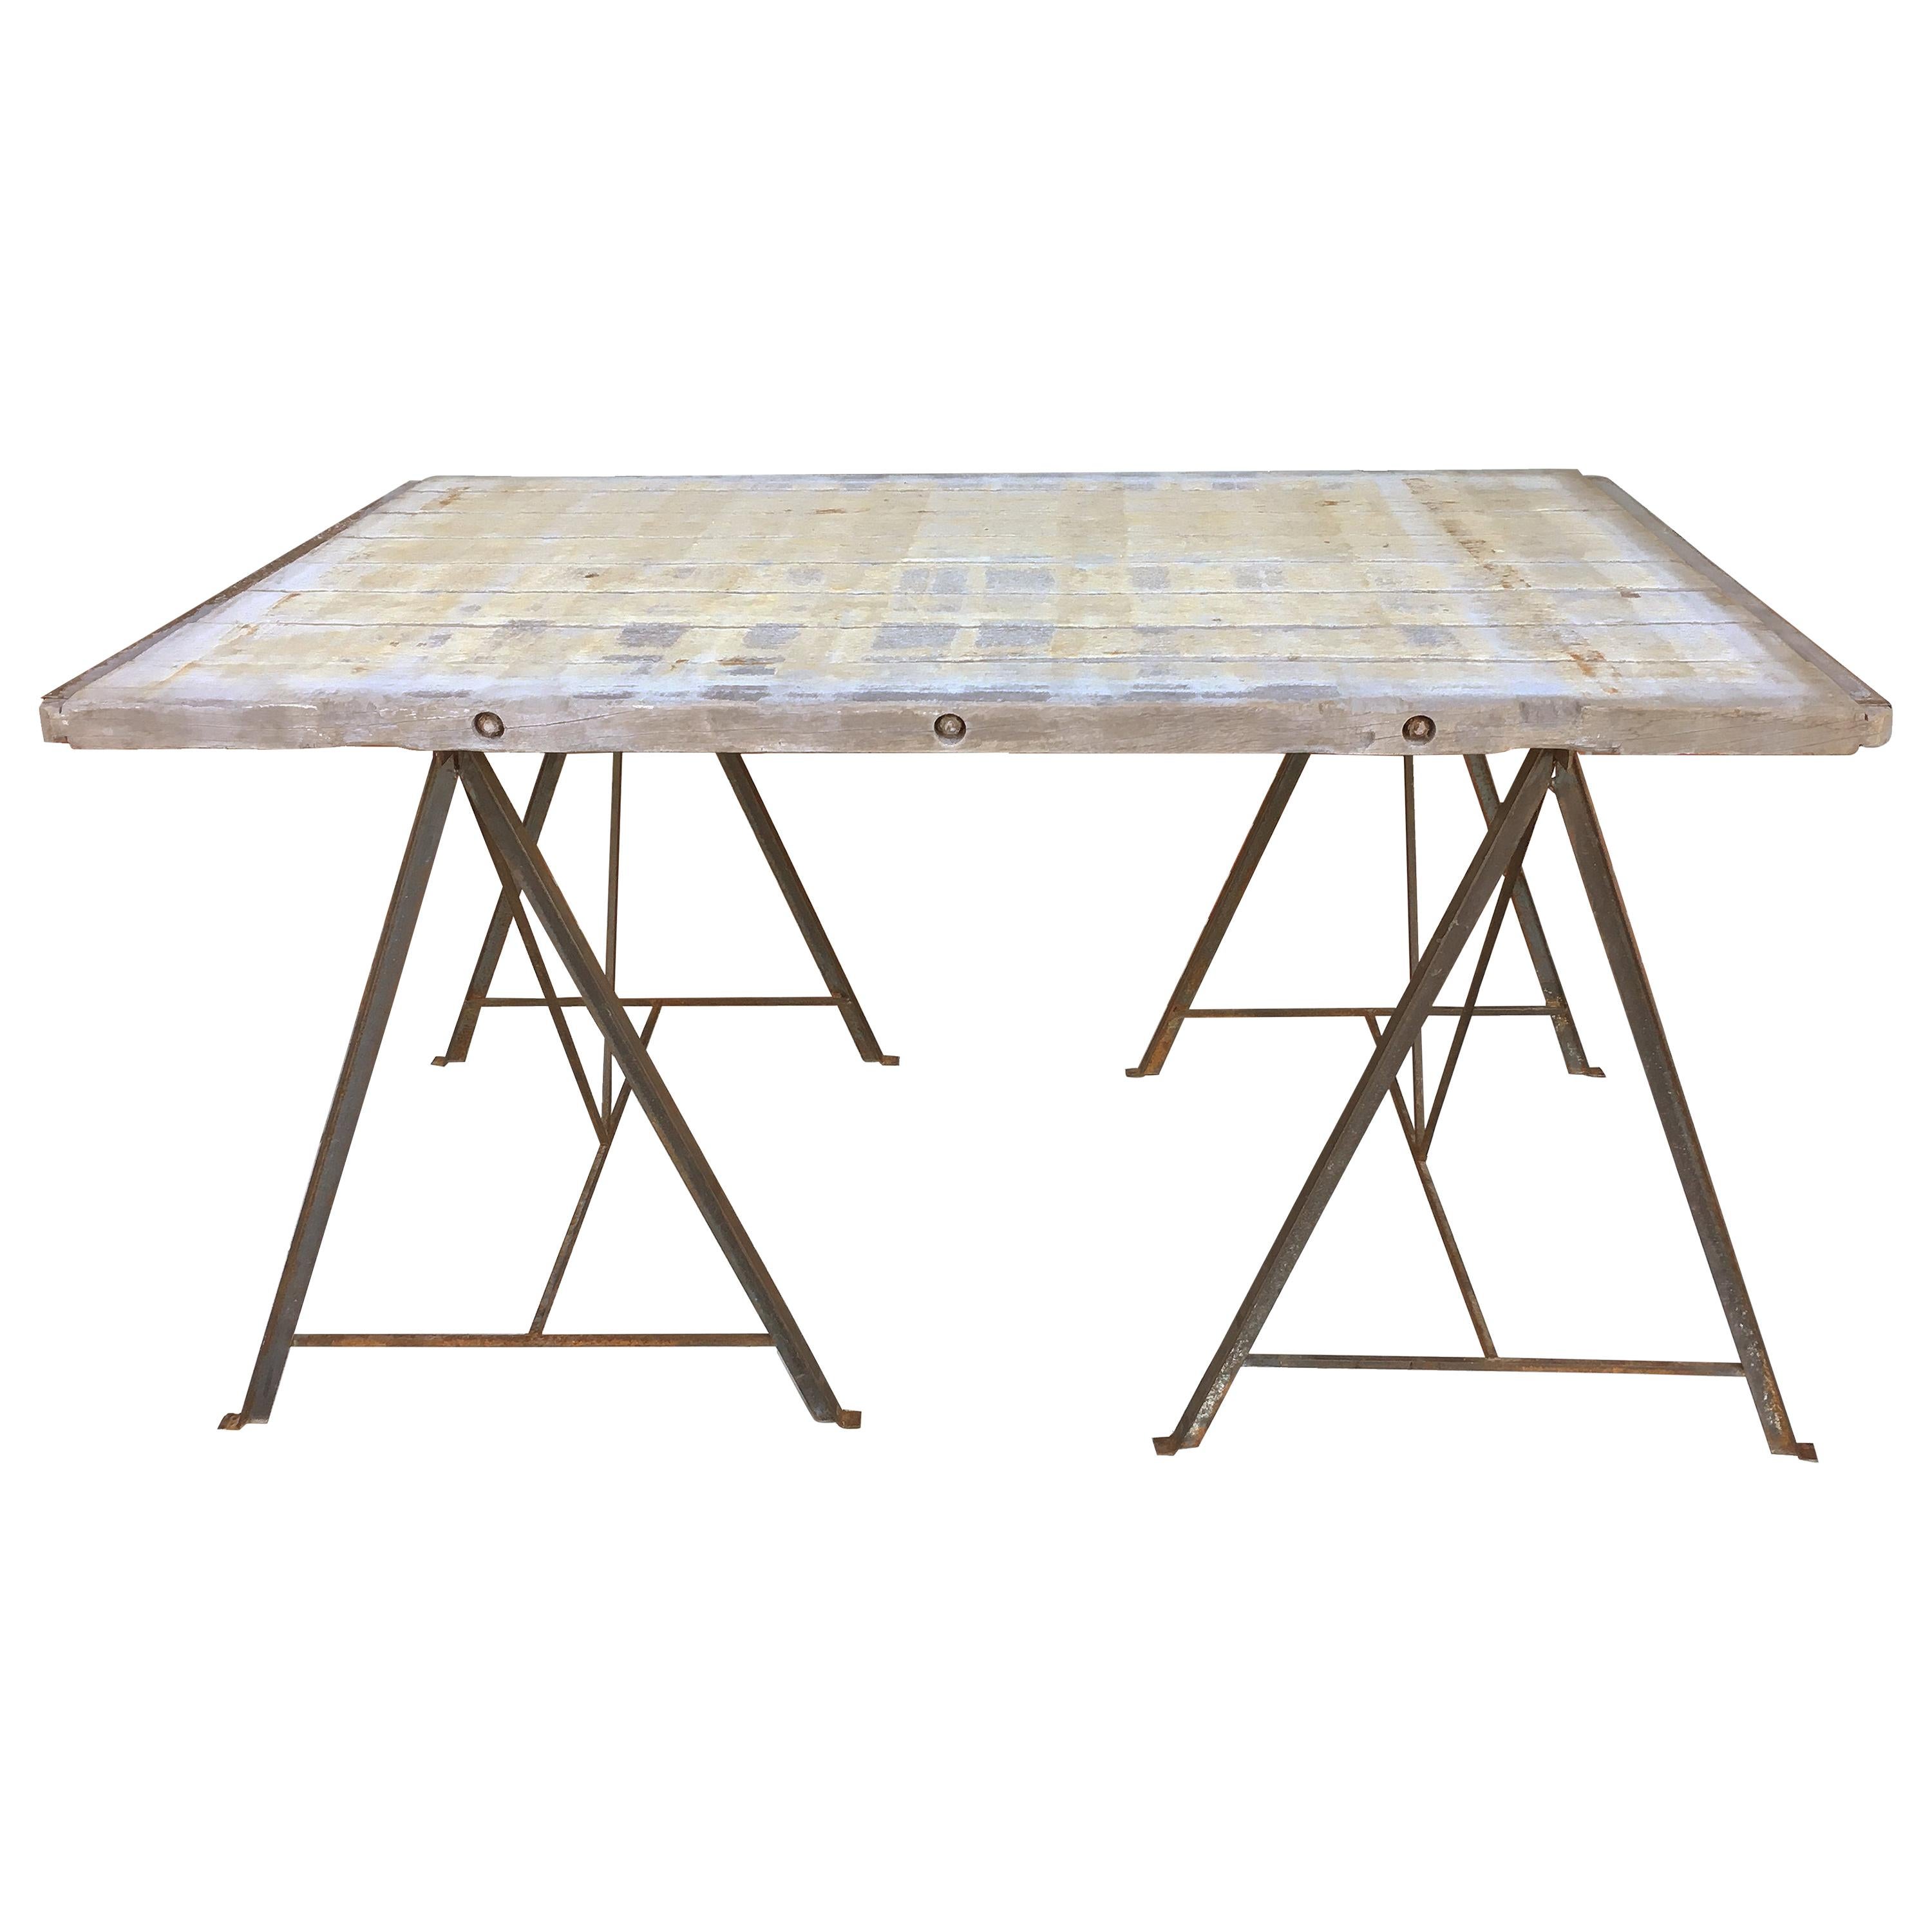 Brick Maker's Table with Metal Base, circa 1920s For Sale